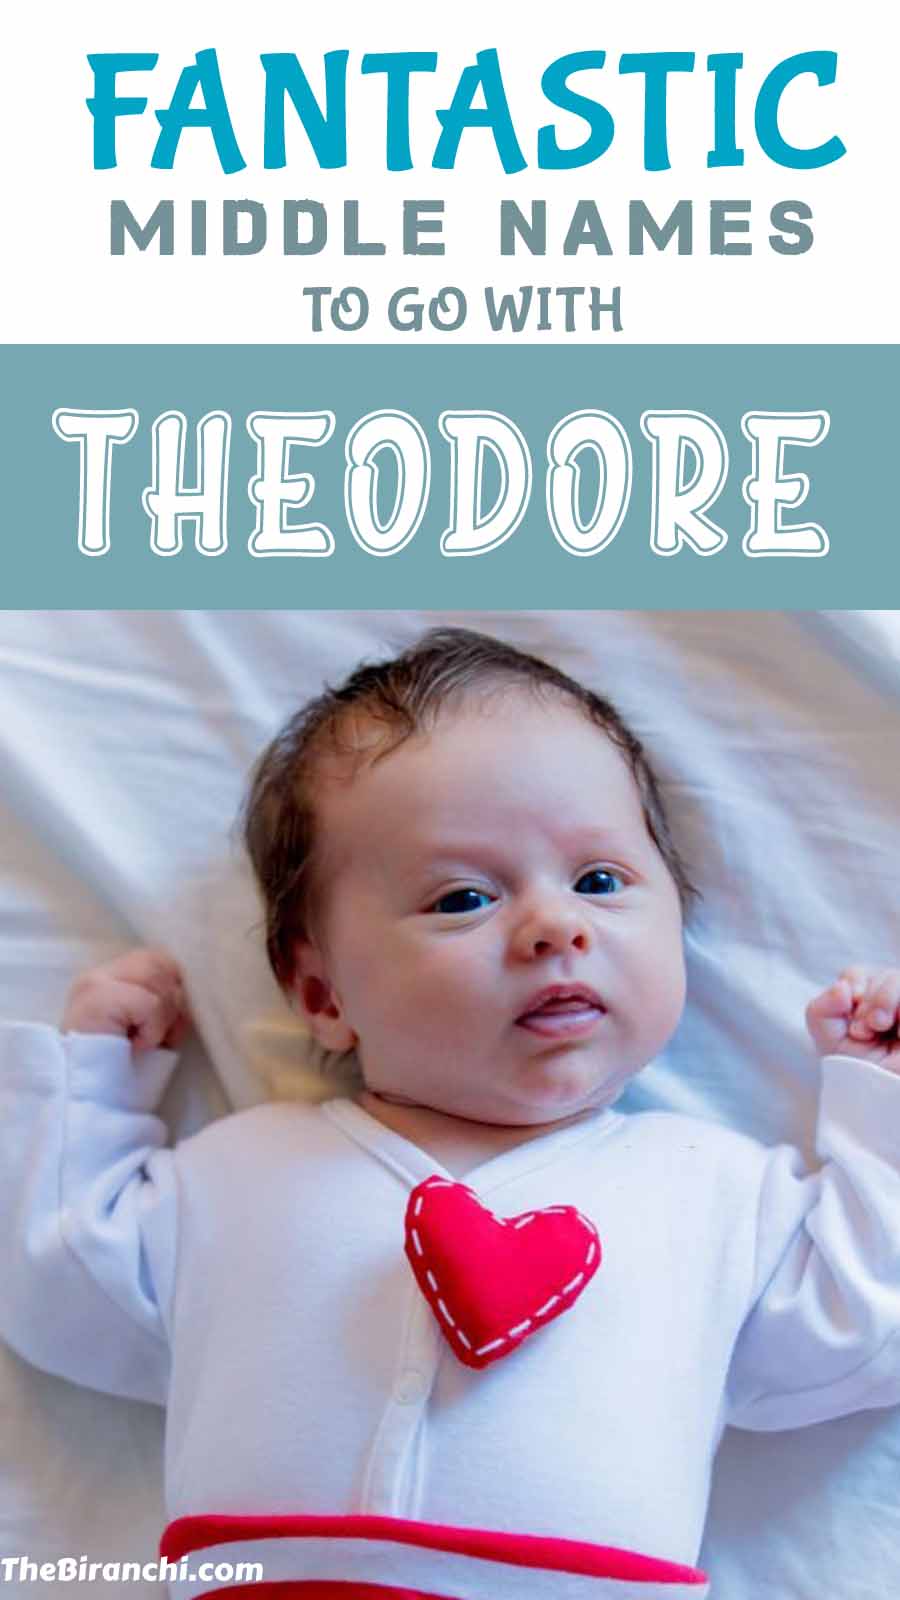 fantastic-middle-names-to-go-with-theodore